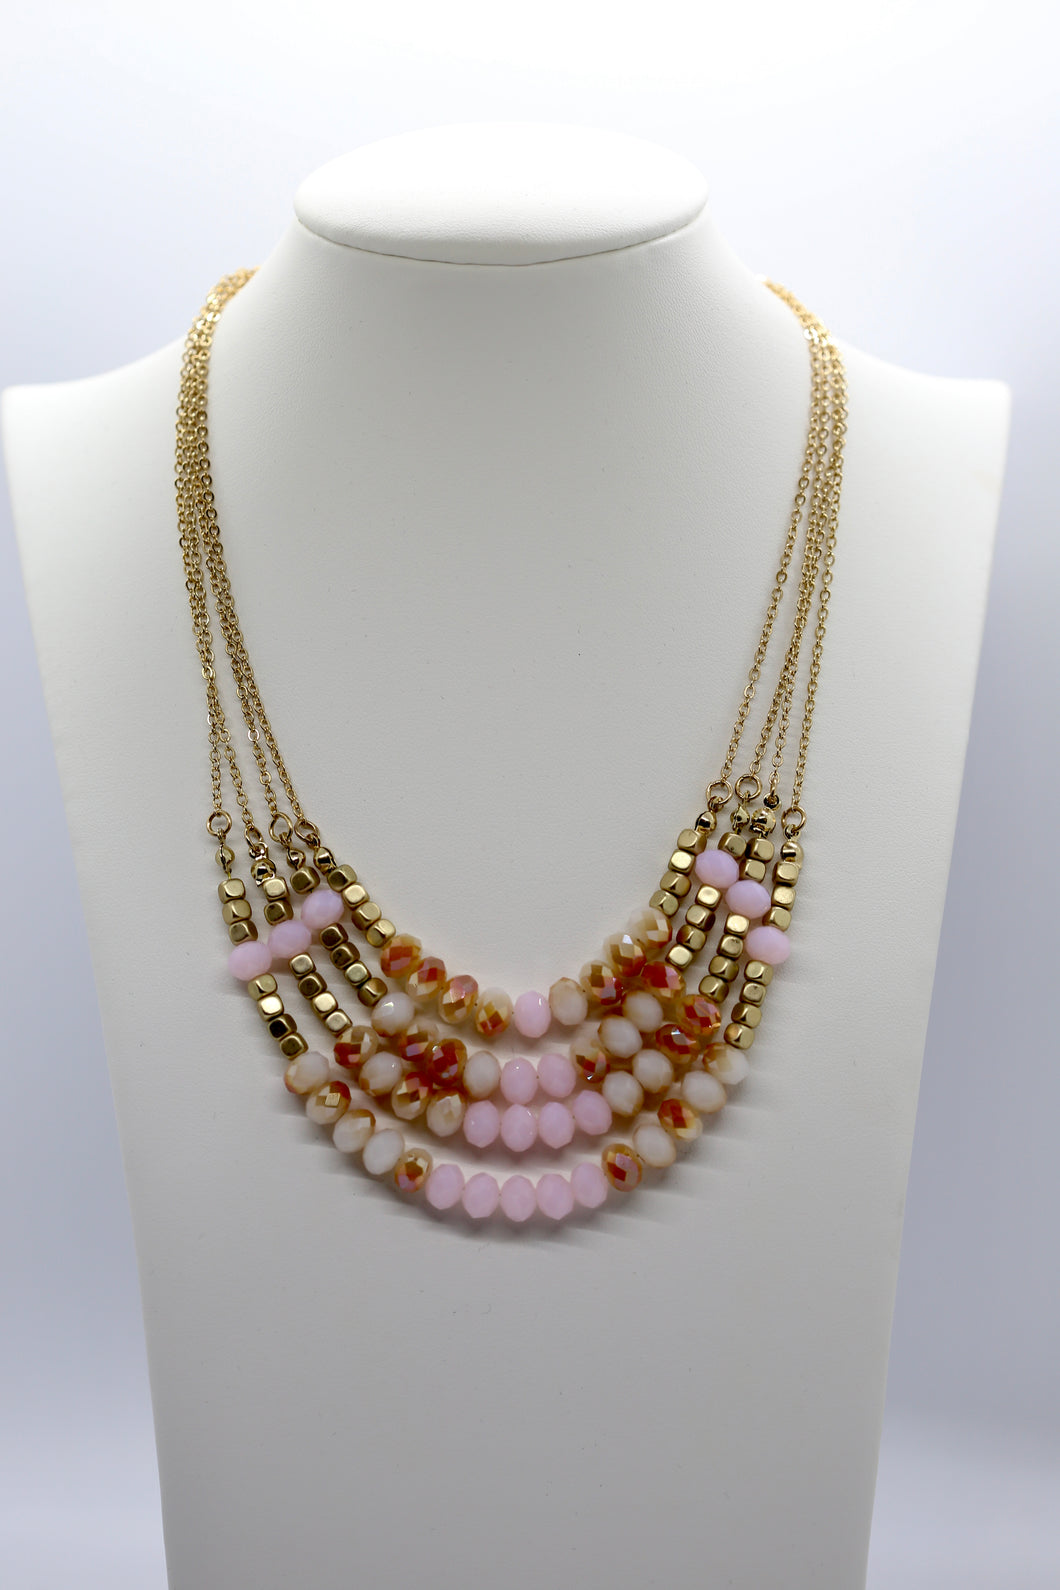 4 Tiered Rose And Gold Beaded Necklace